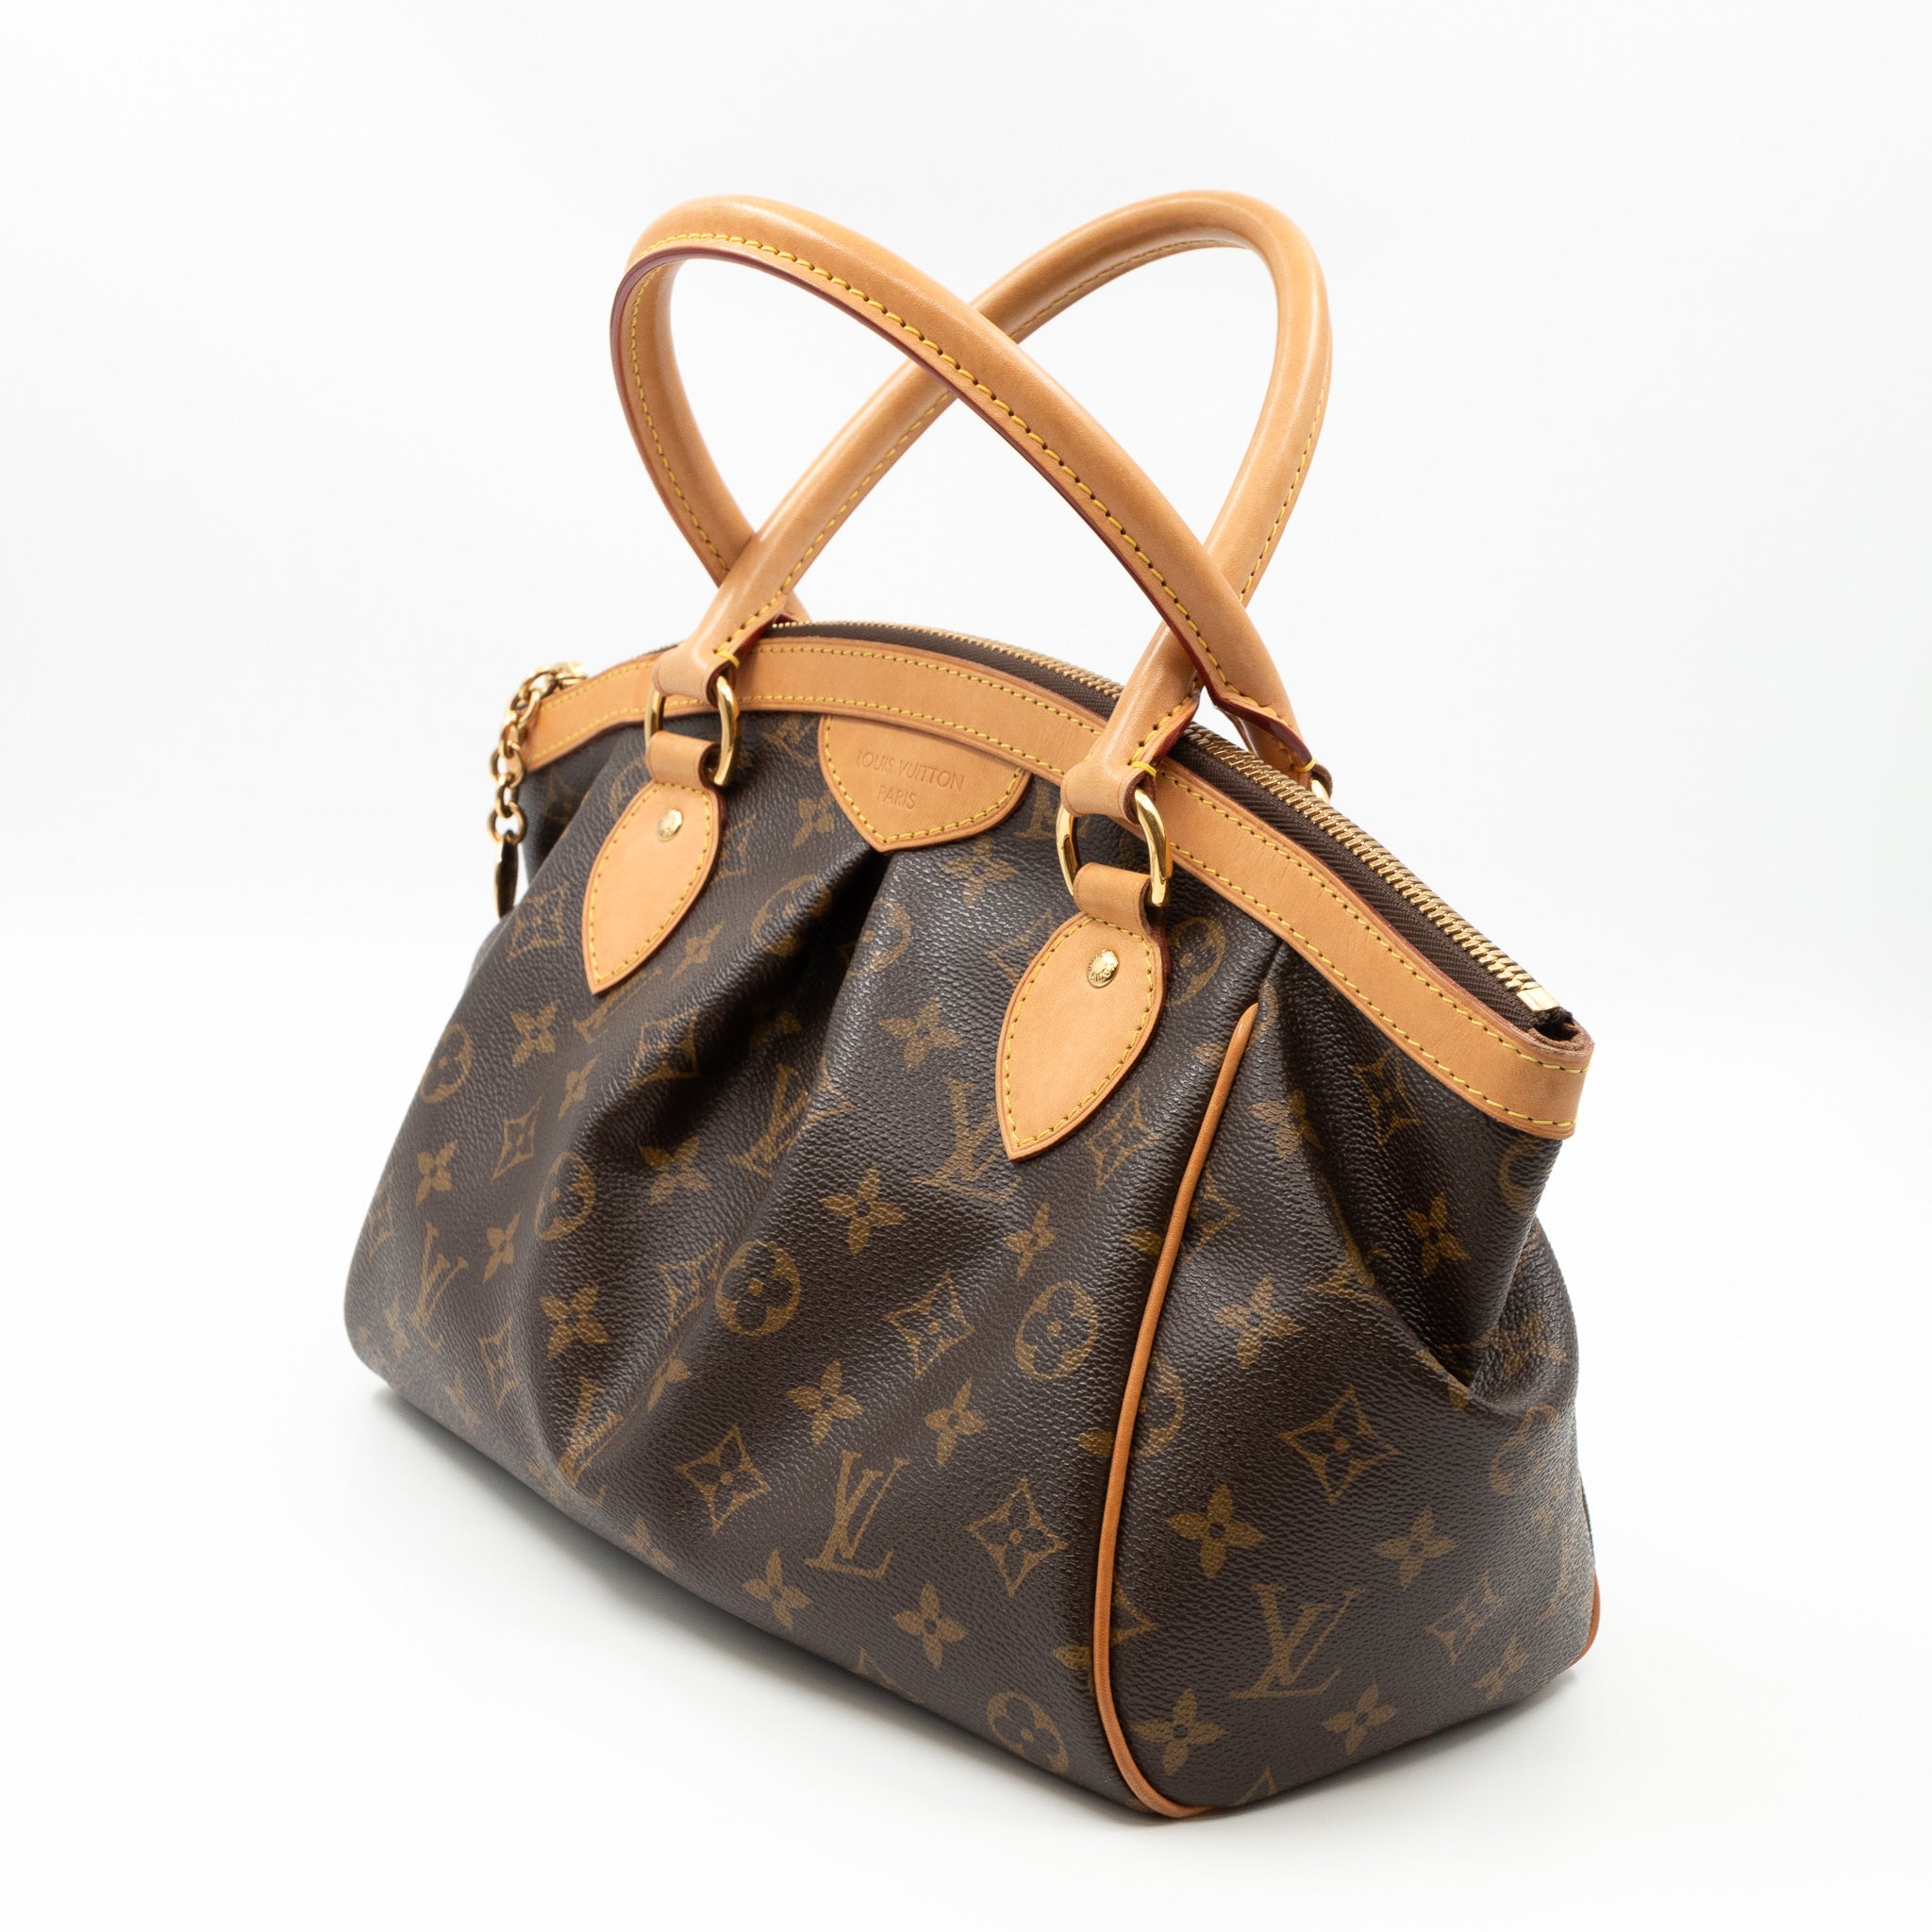 Tivoli GM  Used  Preloved Louis Vuitton Shoulder Bag  LXR USA  Brown   Coated Canvas 2320AD513